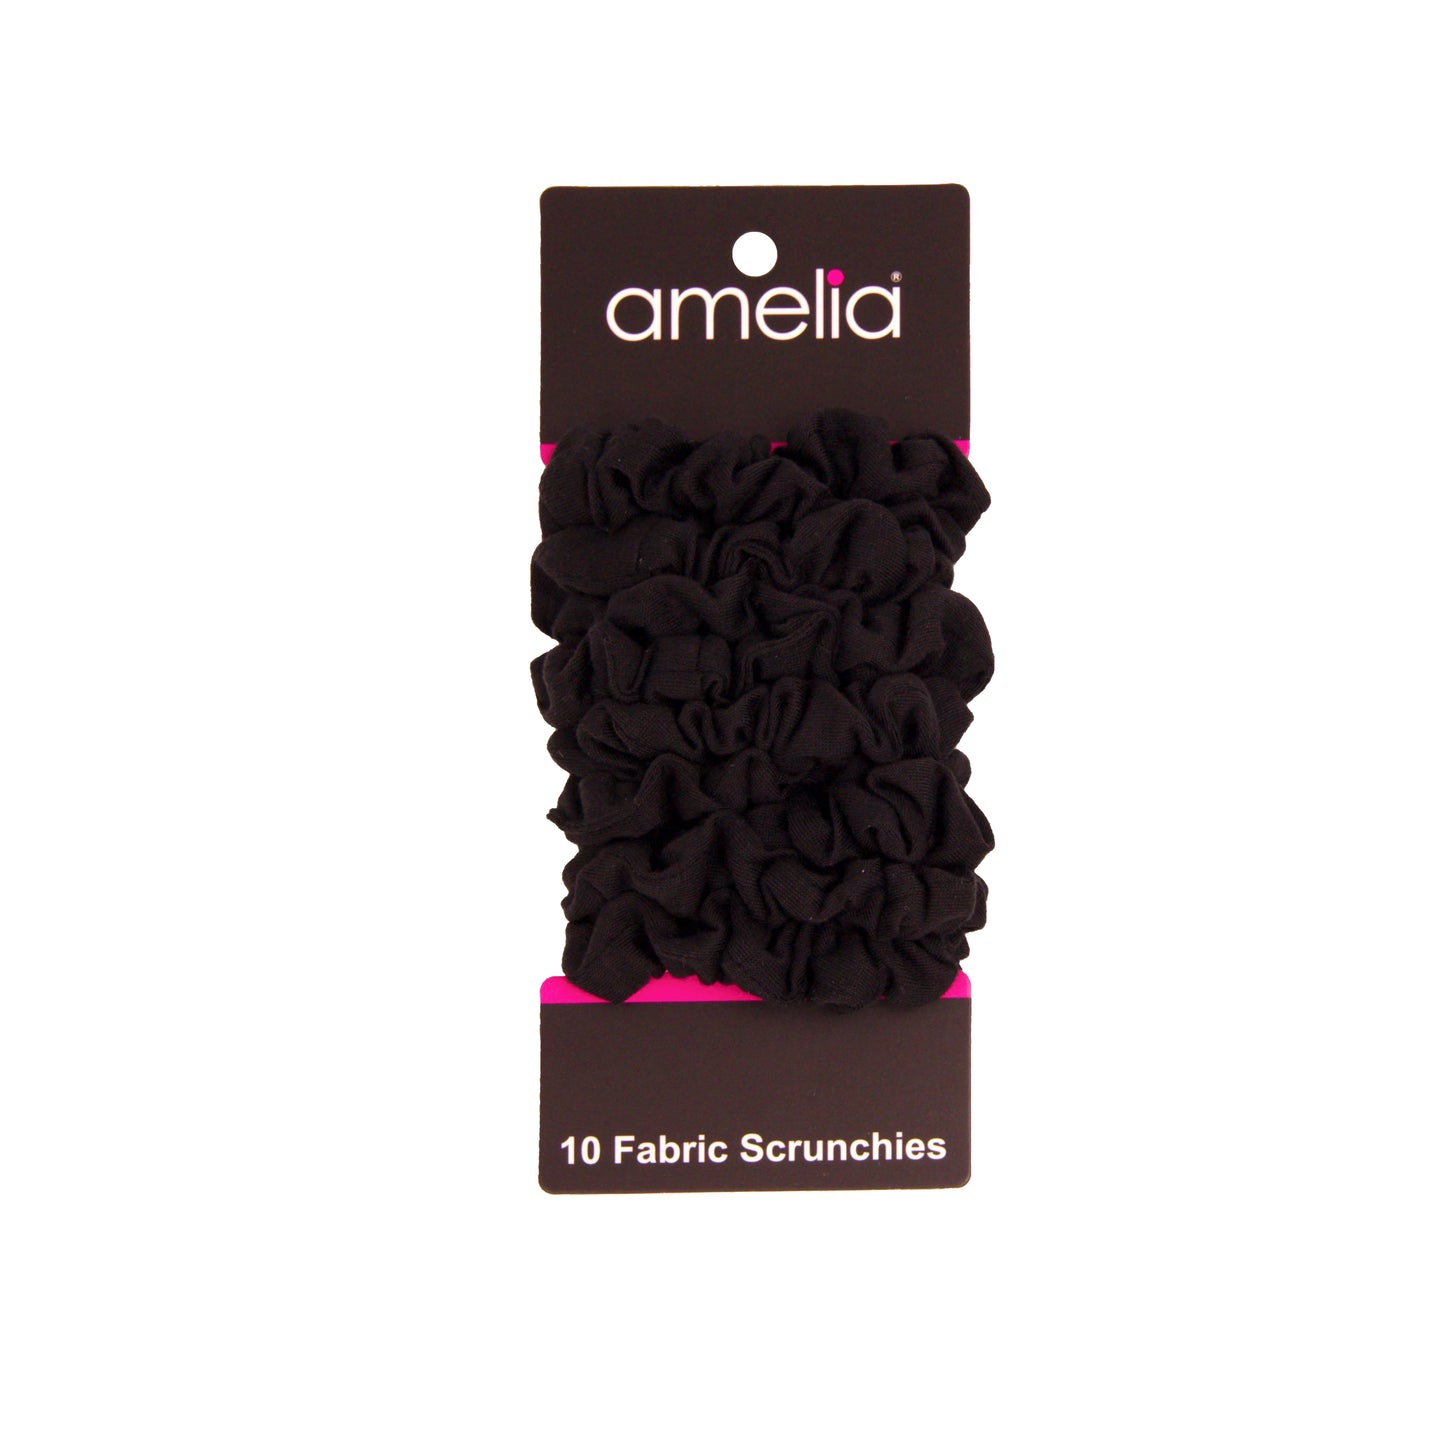 Amelia Beauty, Medium Black Jersey Scrunchies, 2.5in Diameter, Gentle on Hair, Strong Hold, No Snag, No Dents or Creases. 10 Pack